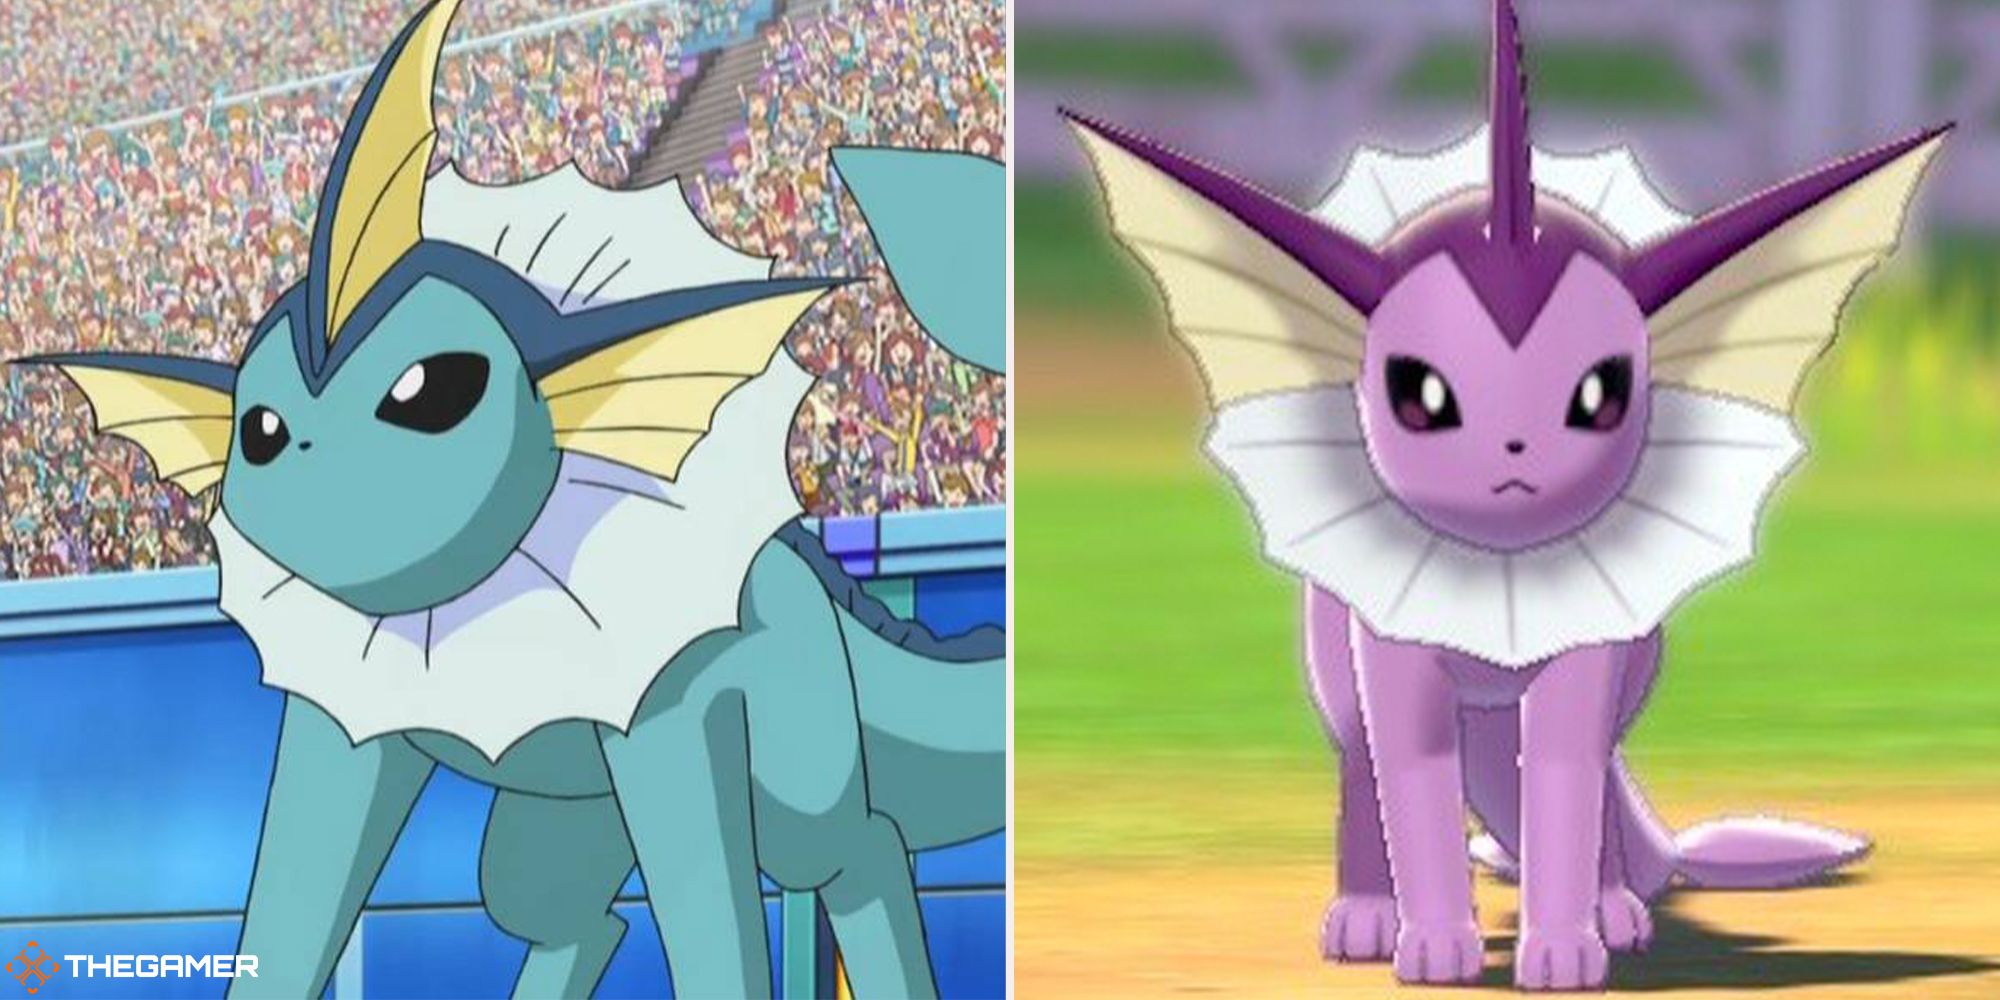 A split image of Vaporeon in the Pokemon anime on the left and shiny Vaporeon on the right.